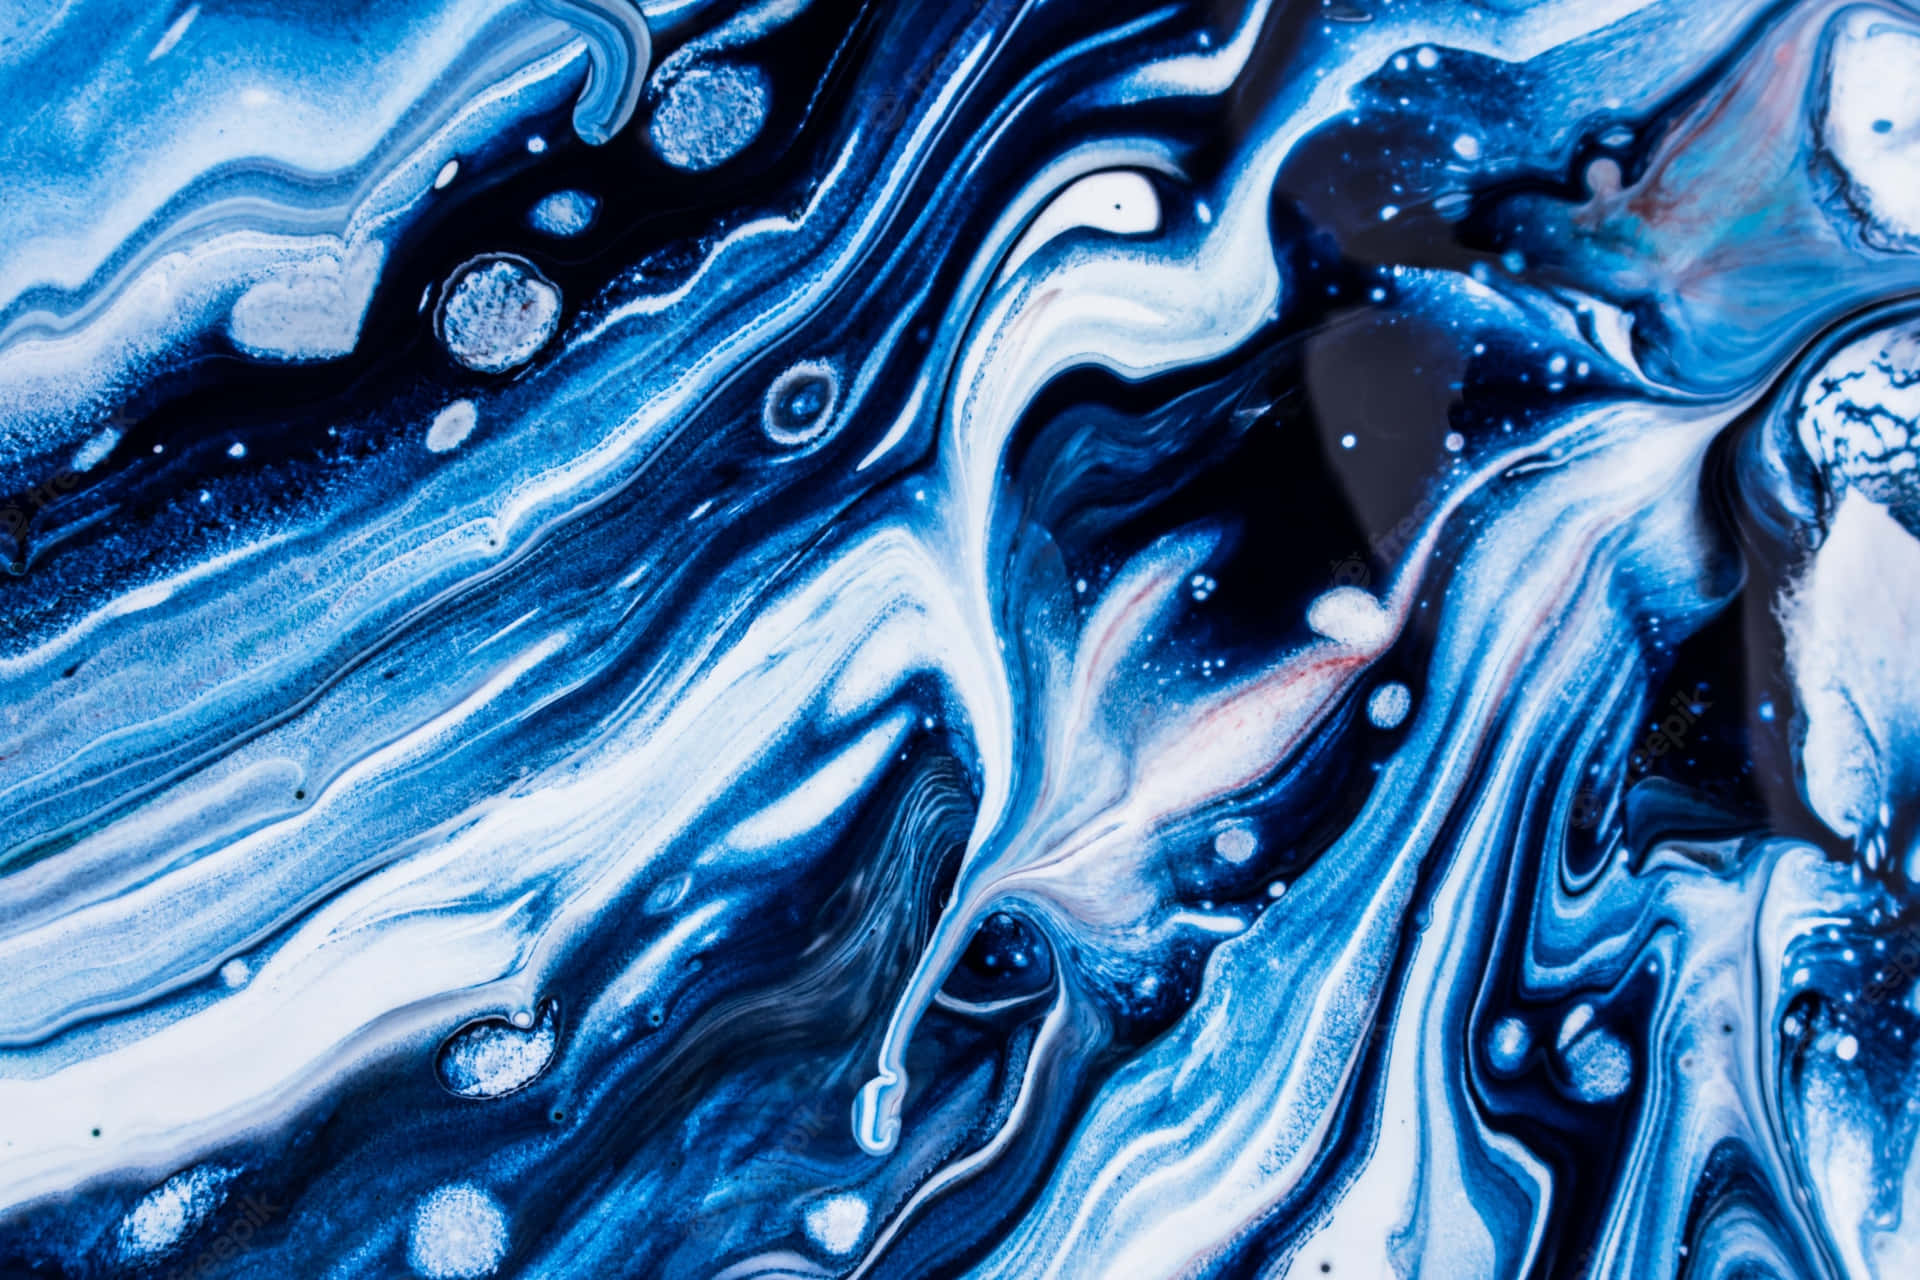 Get the Latest Technology: The Blue Marble Laptop Wallpaper